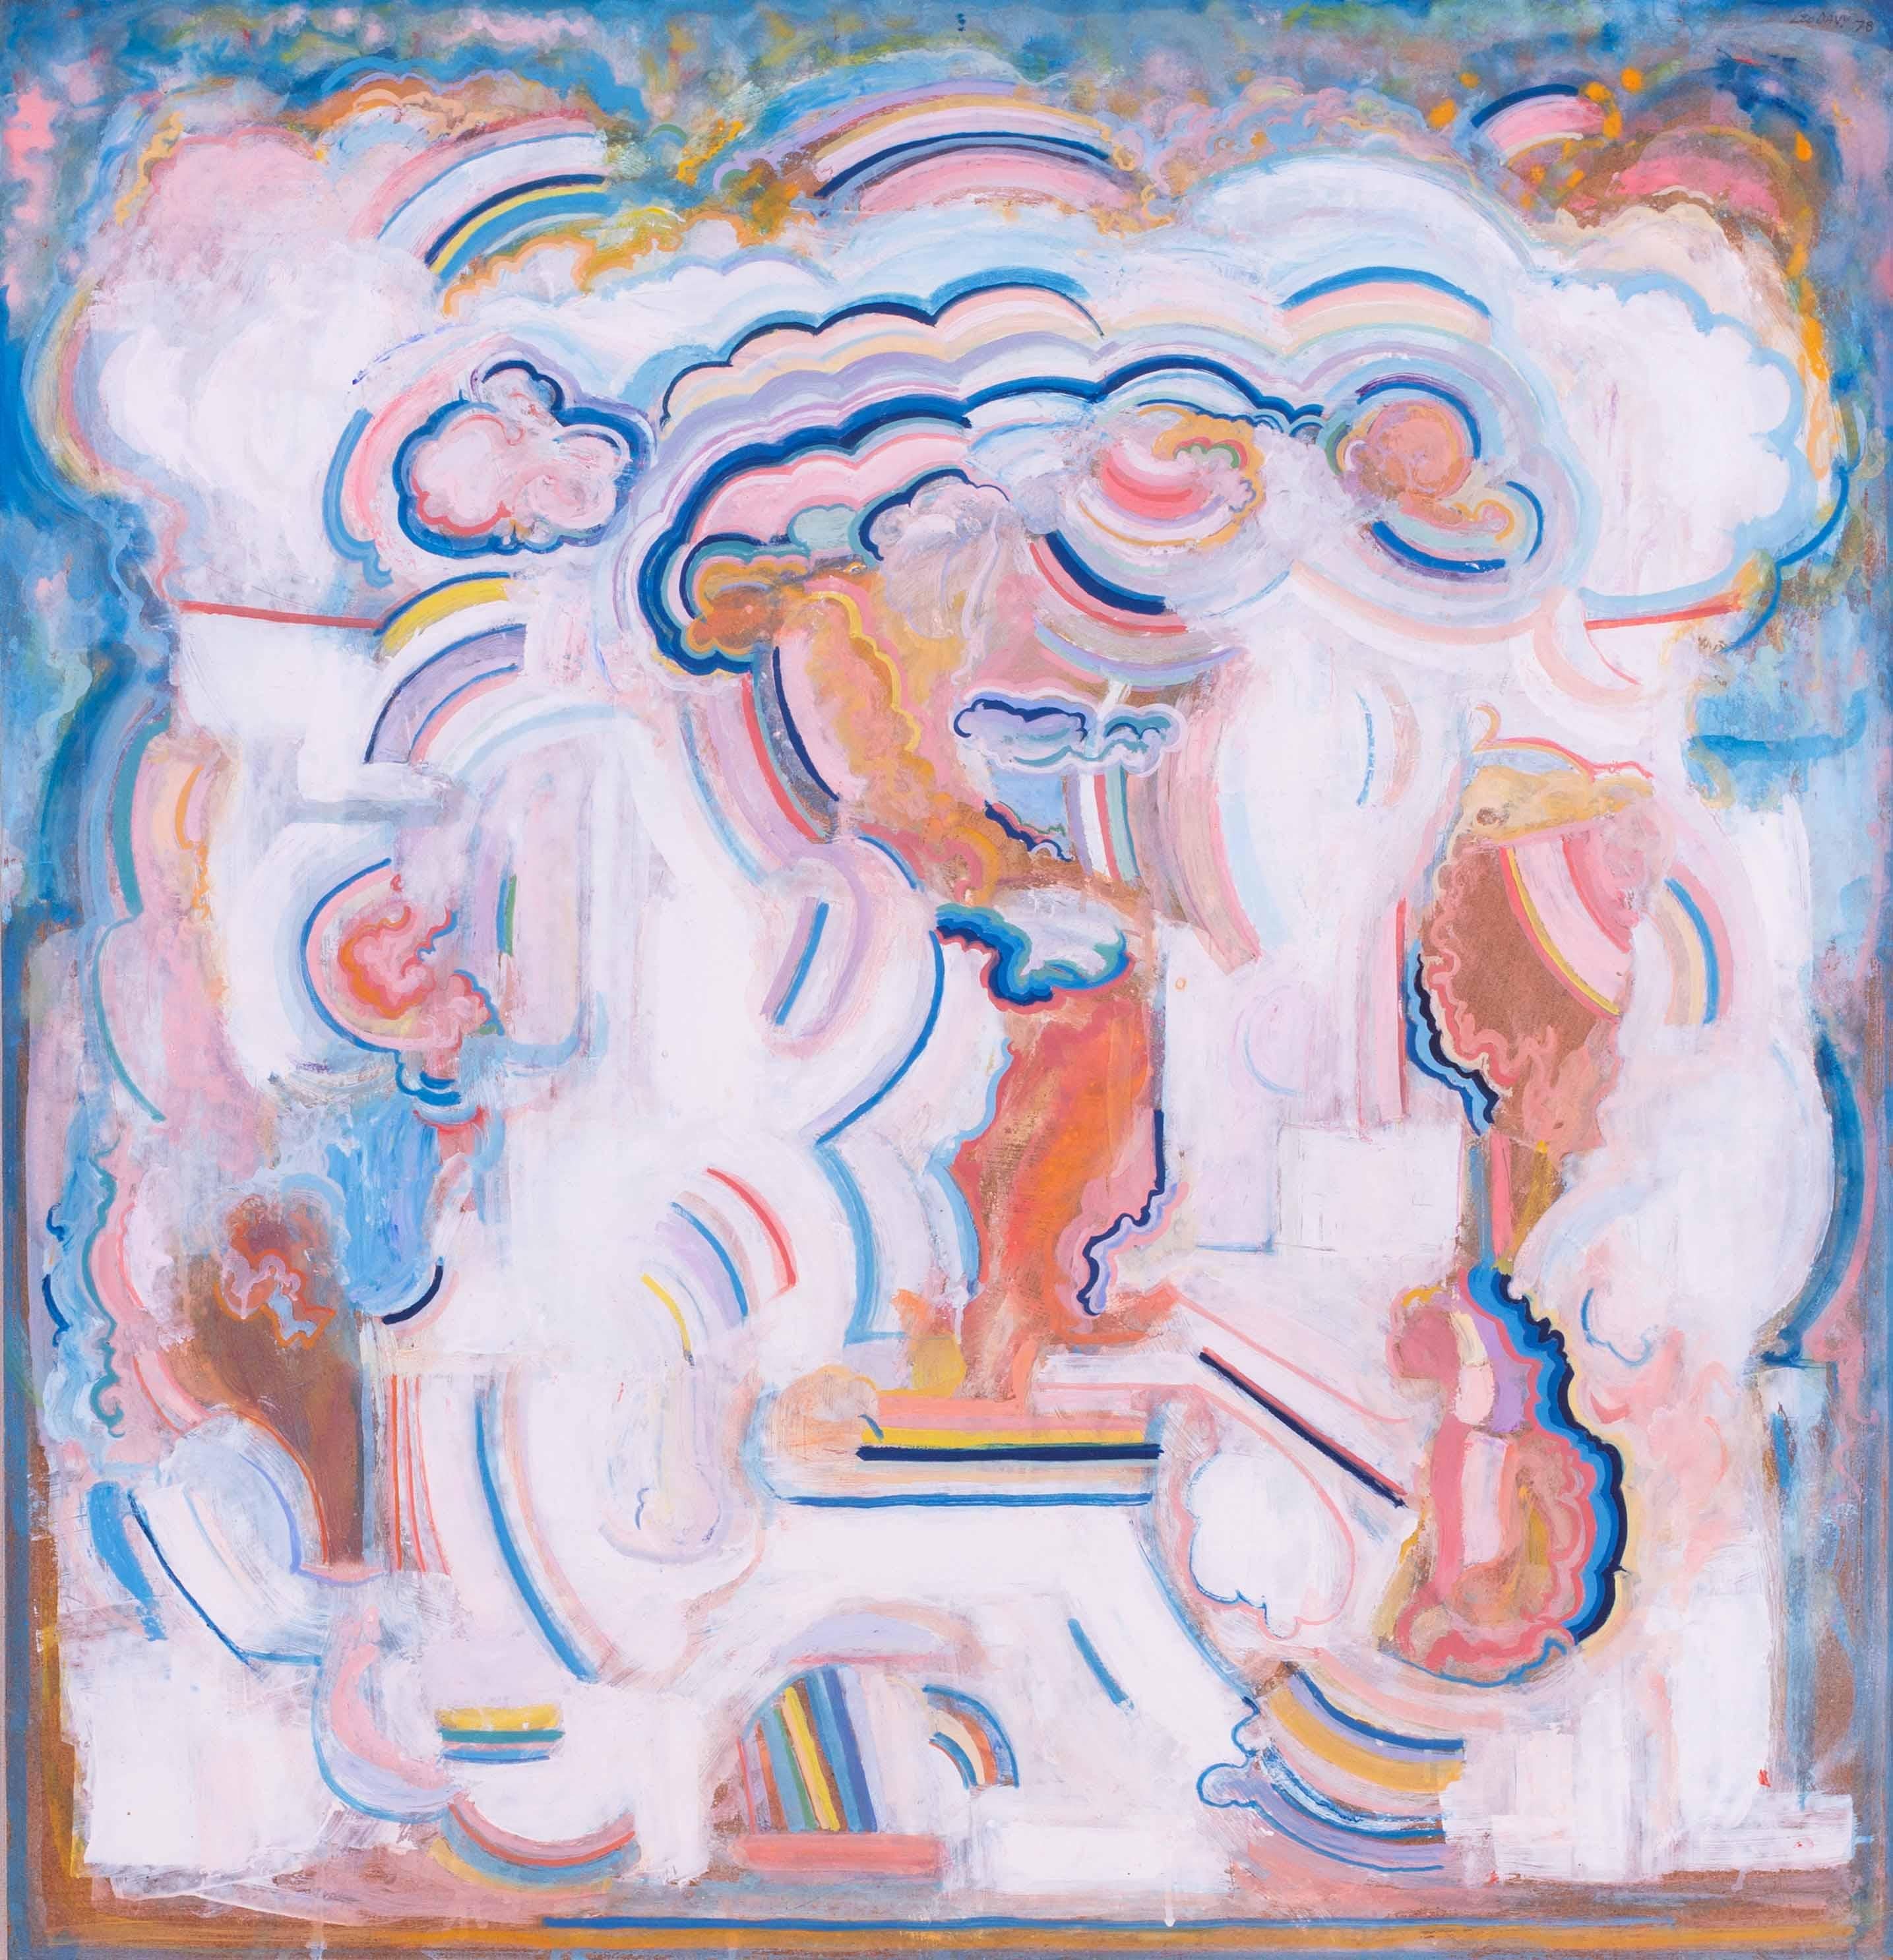 Leo Davy, British, 1978 oil on board, large abstract work, pinks, whites, blues 1